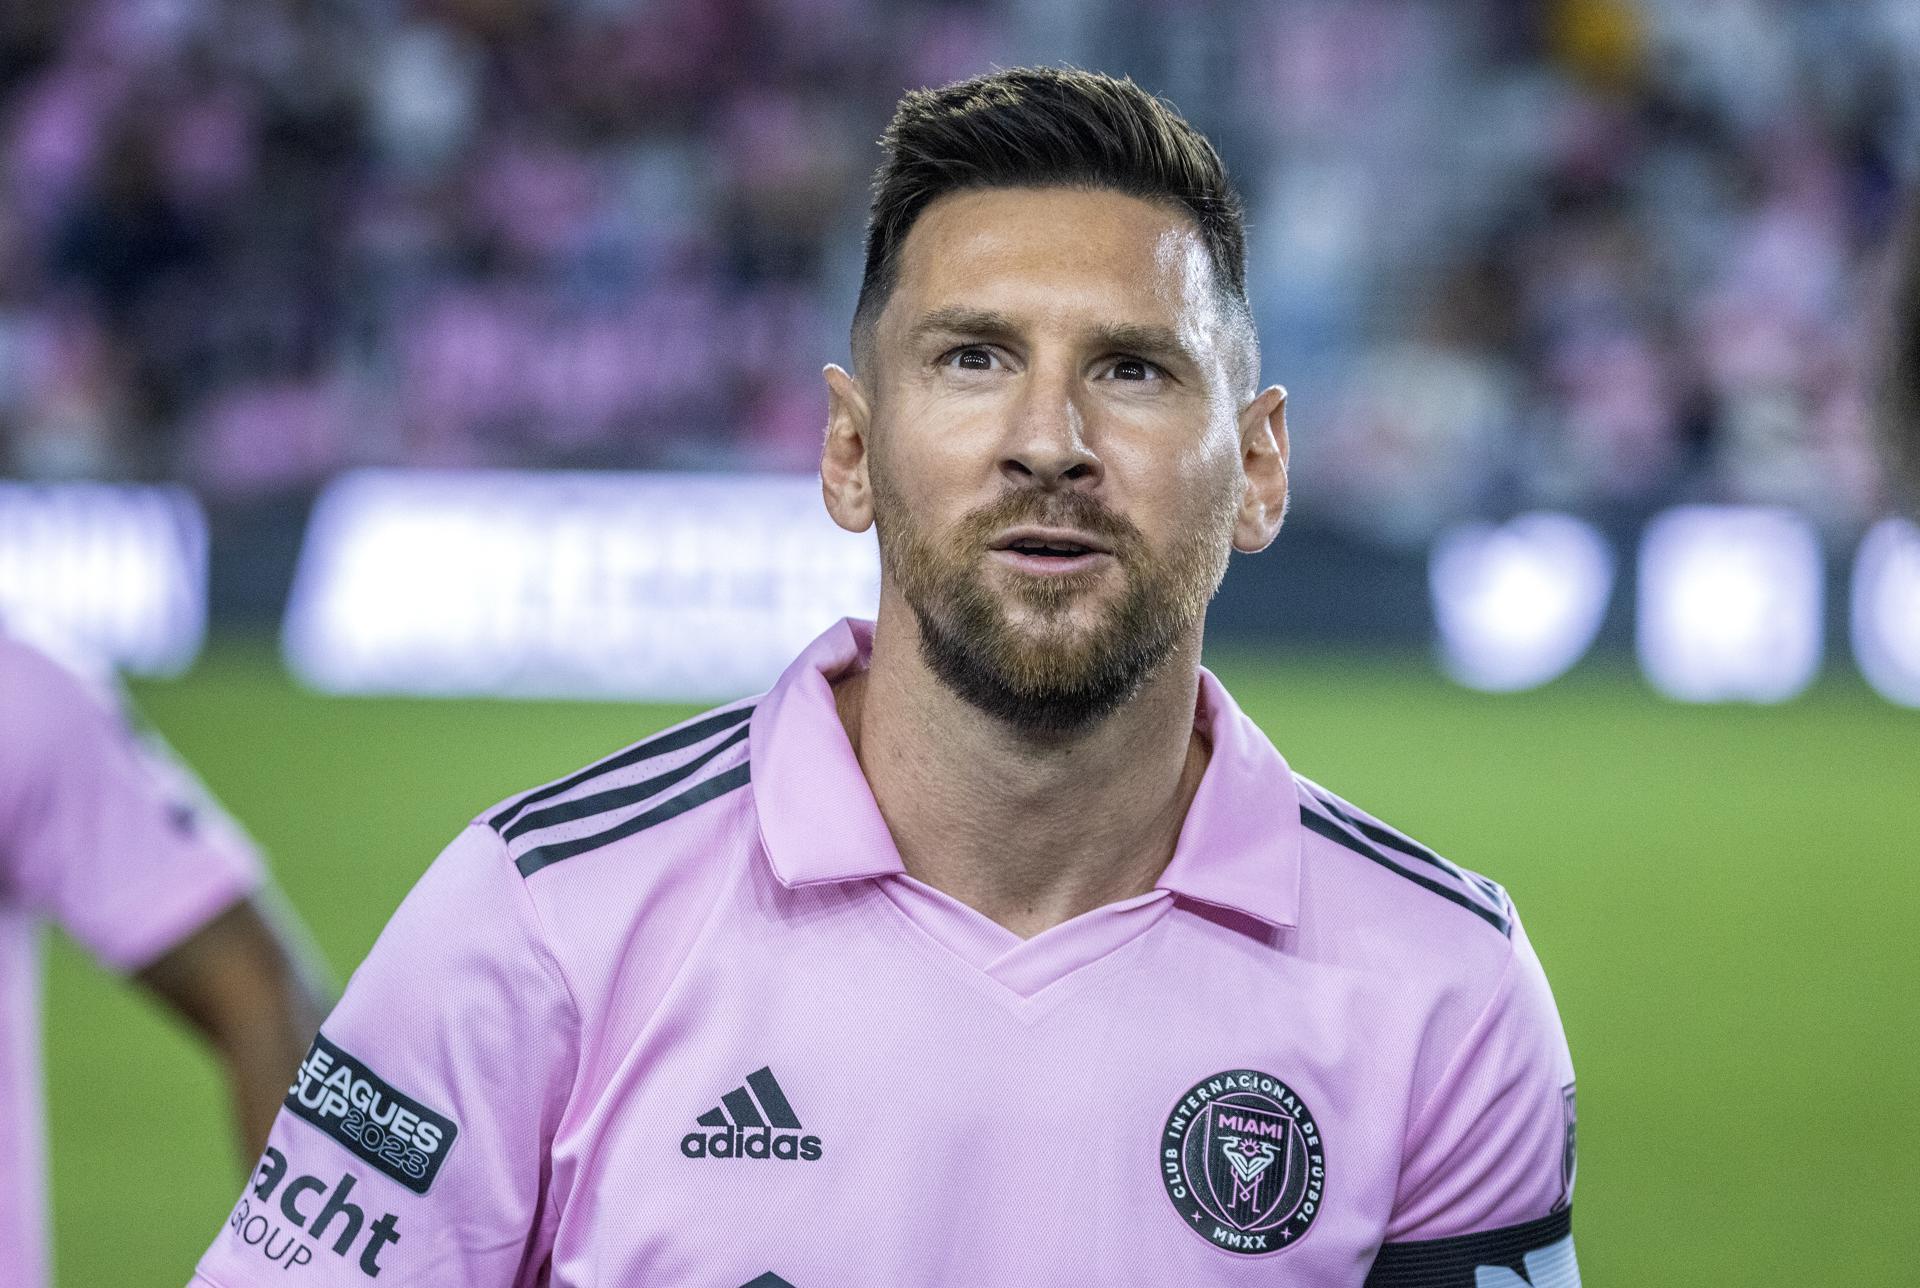 Inter Miami forward Lionel Messi salutes before the Leagues Cup quarter final soccer match between Inter Miami CF and Charlotte FC in Fort Lauderdale, Florida, US, 11 August 2023. EFE-EPA/CRISTOBAL HERRERA-ULASHKEVICH